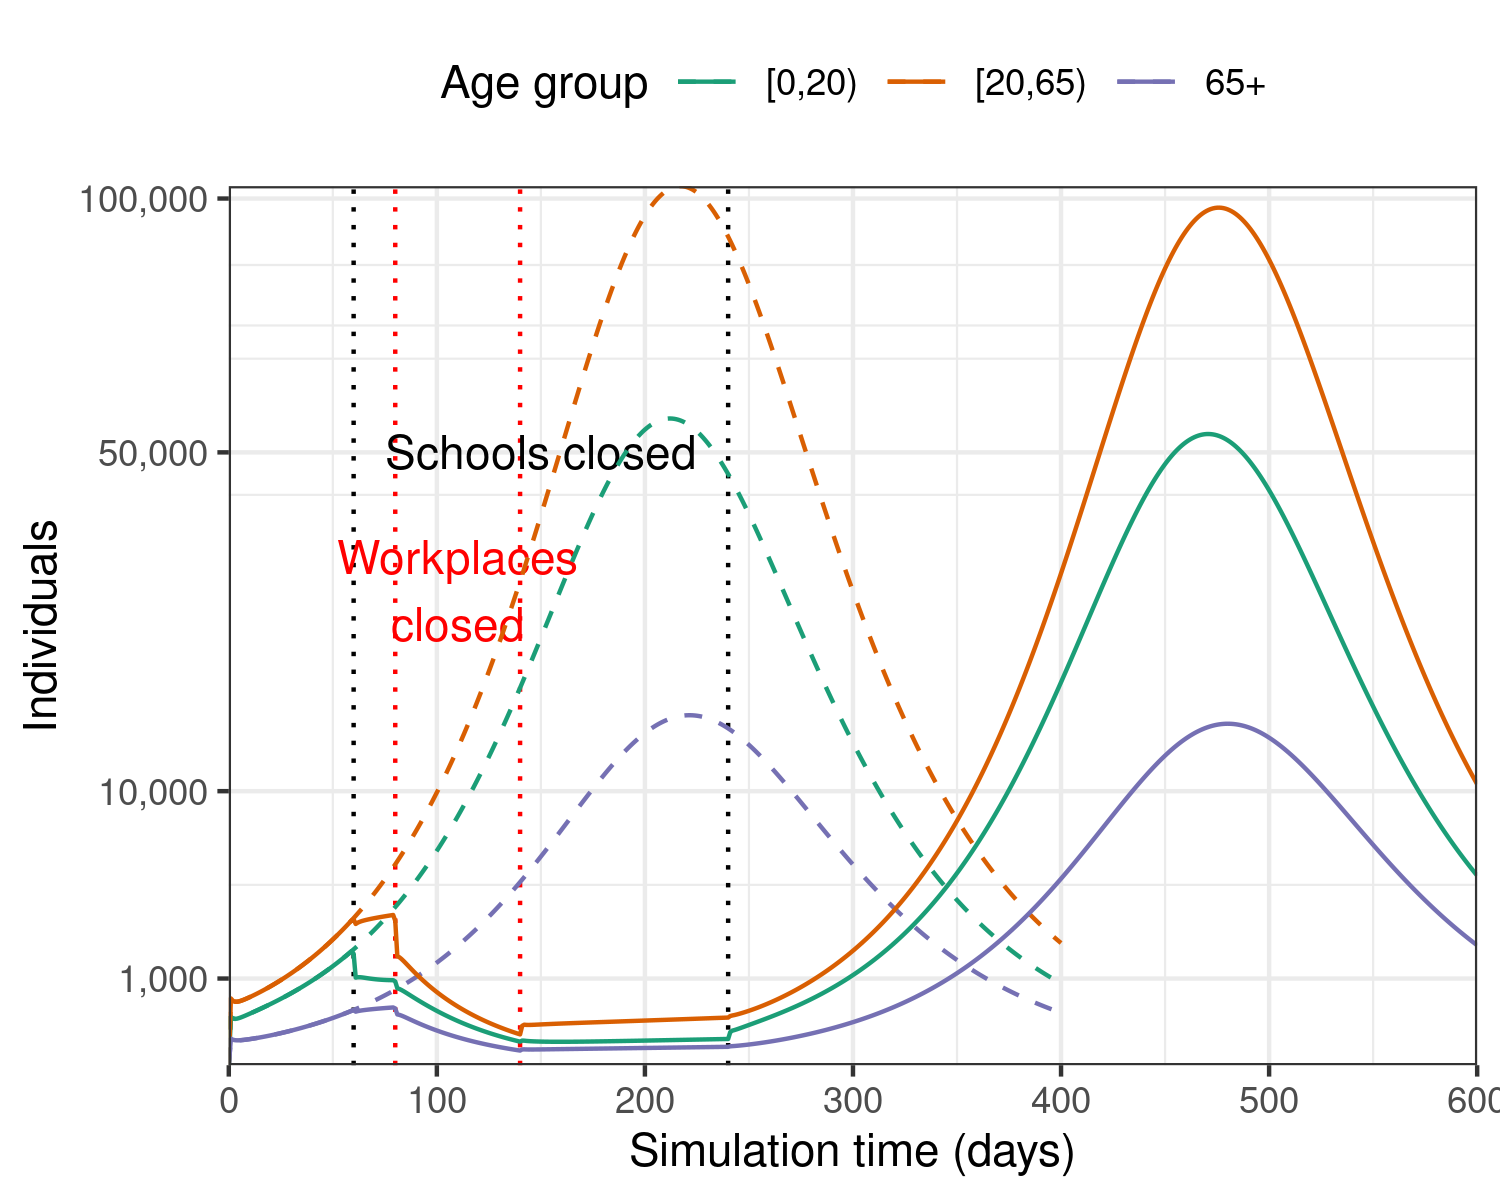 Epidemic model with two overlapping interventions in the early phase of the outbreak: school closures that target infections among younger people, and workplace closures which target infections among working-age adults.